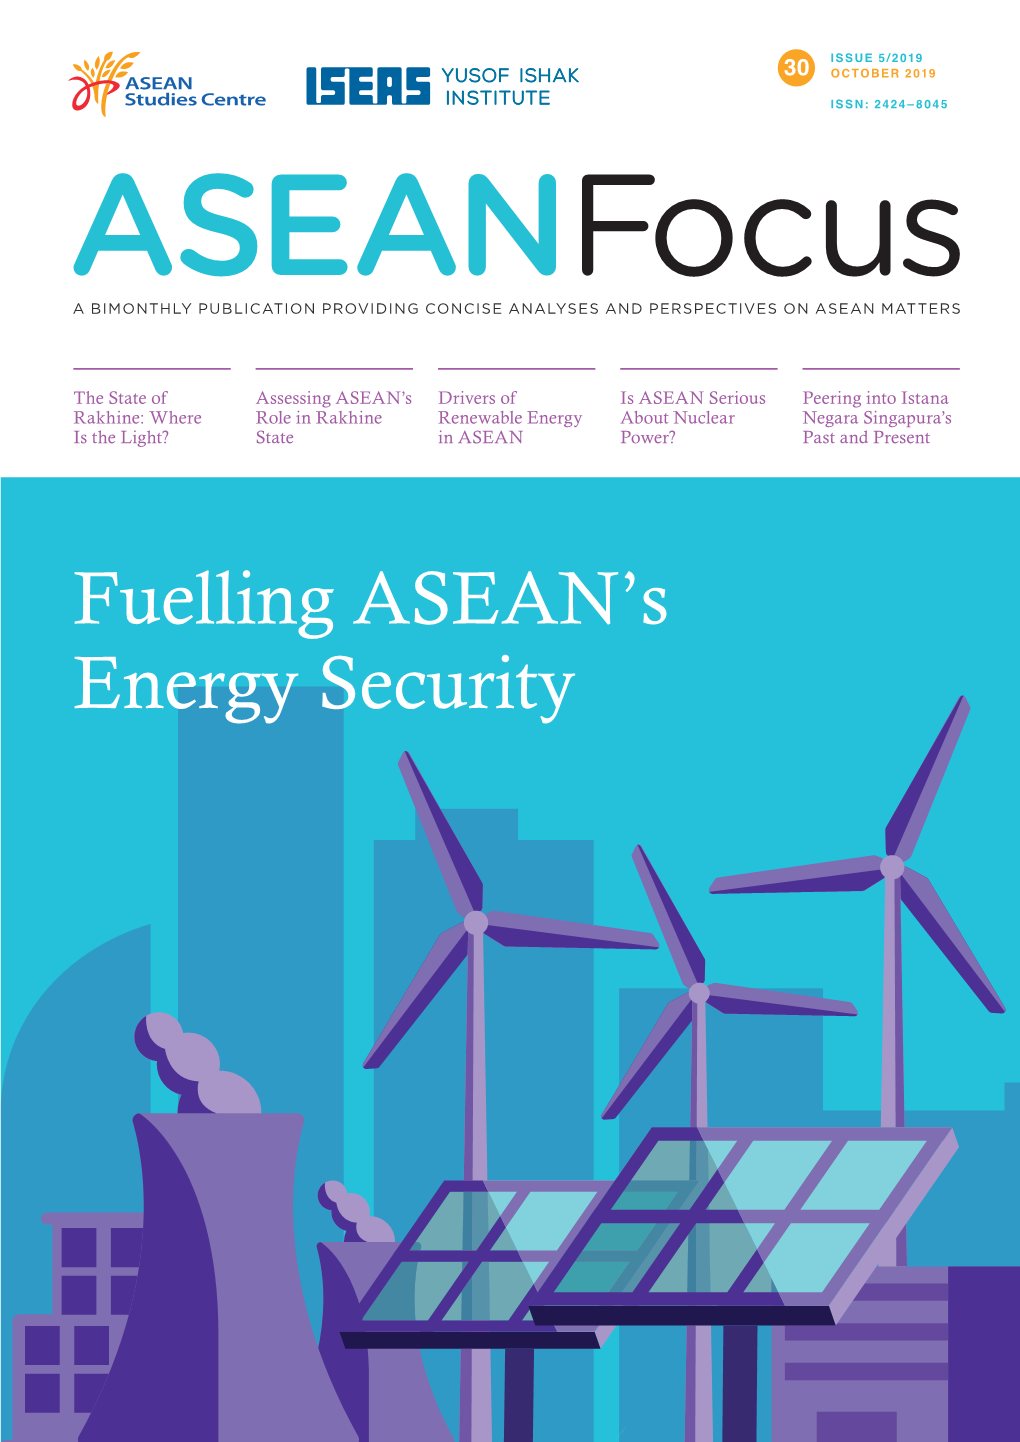 Fuelling ASEAN's Energy Security